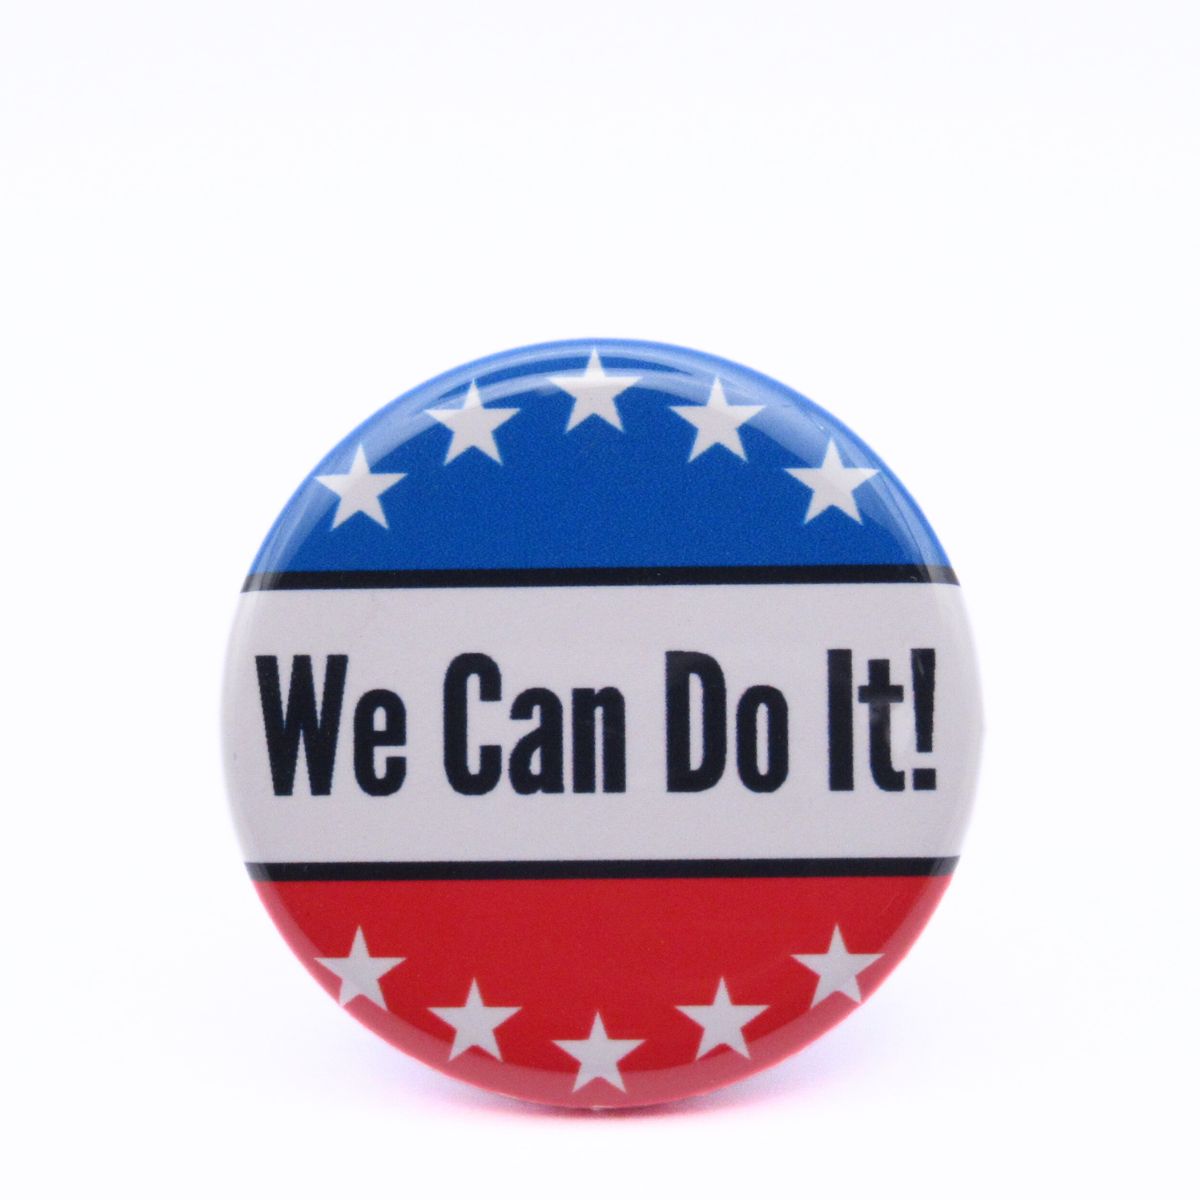 BooBooRoo Pinback Button (i.e. button, badge, pin) of Rosie the Riveter's saying of "We Can Do It!" on a red, white and blue background with white stars.